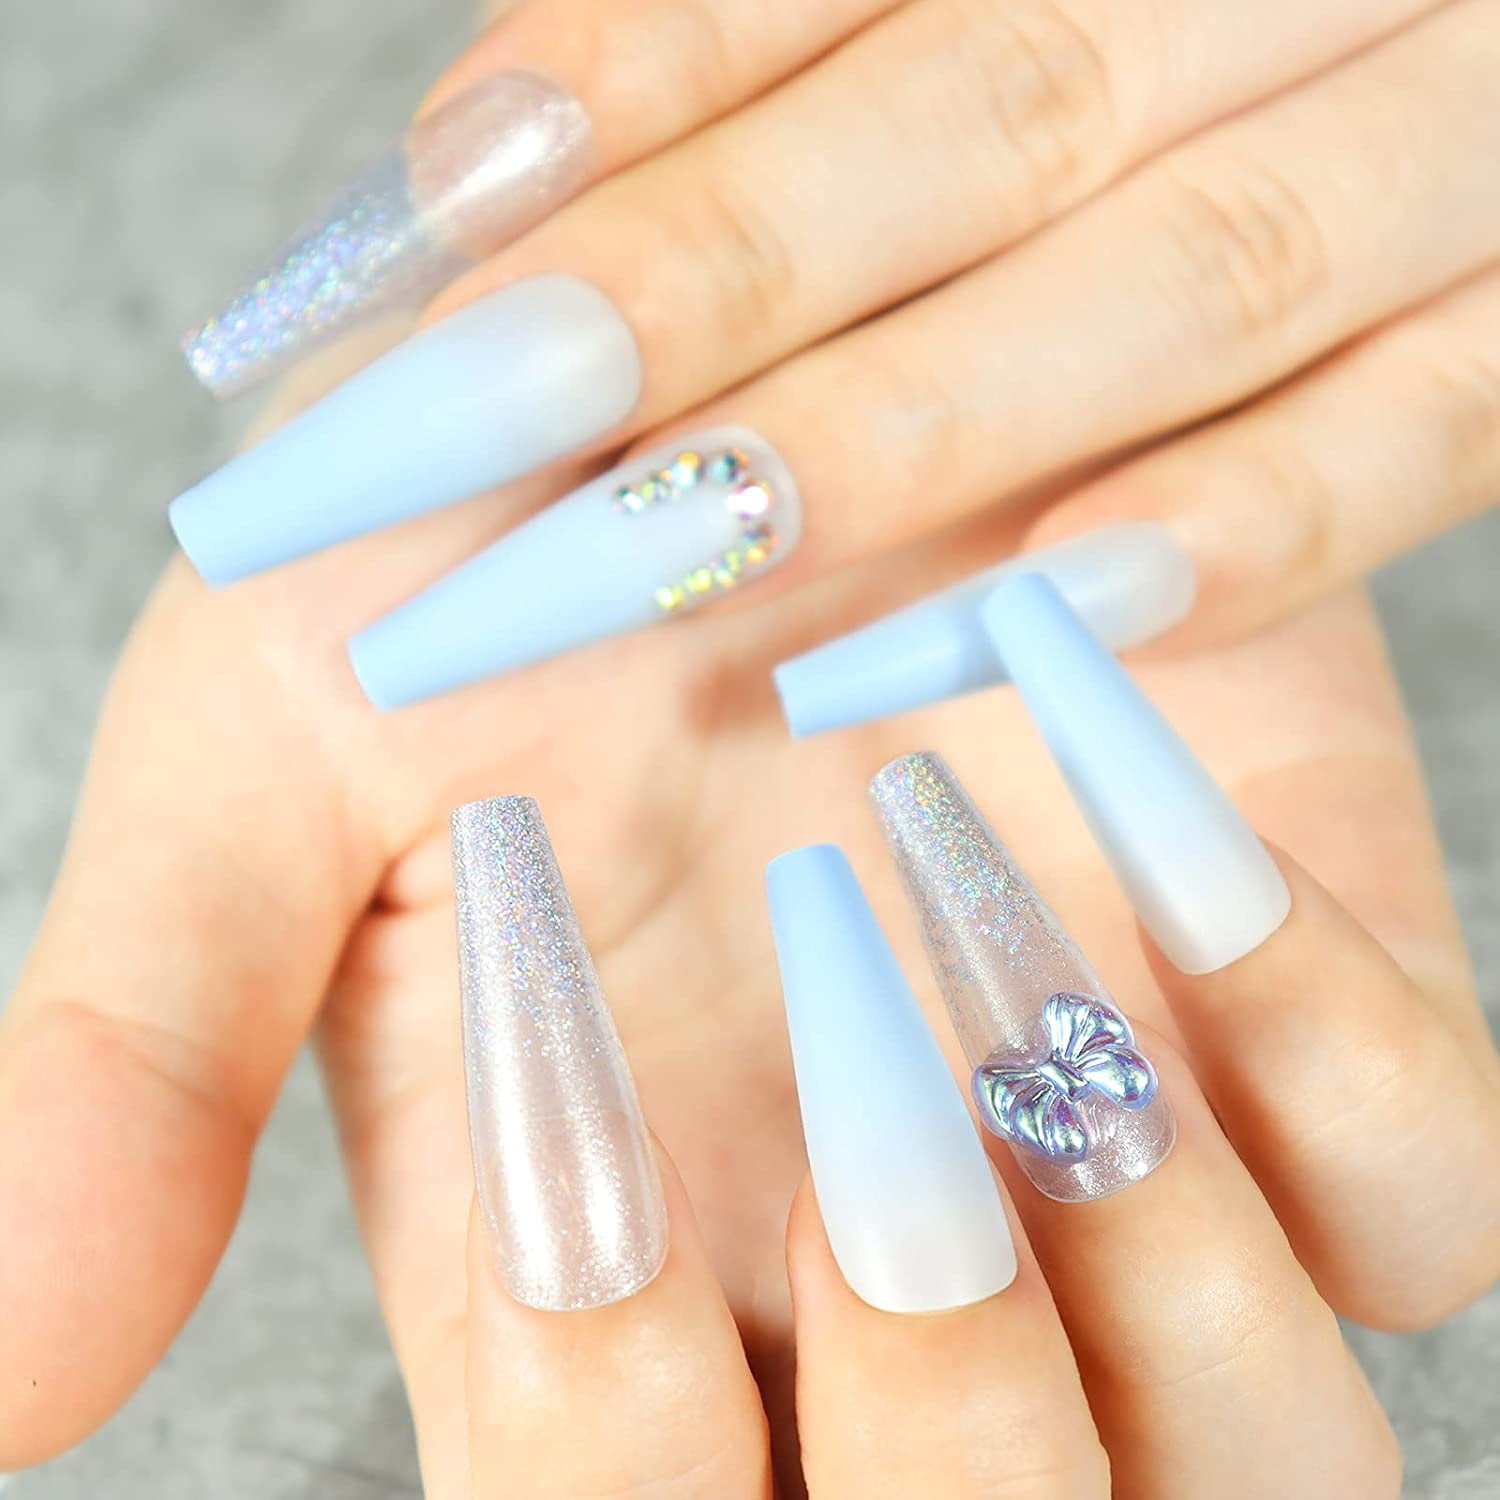  Artquee 24pcs French Blue Ombre Crystal Press on Nails with 3D  Rhinestones Glossy Mixed Blue Metal and Glitter False Nails Long Ballerina  Coffin Flash Fake Nail Tips Manicure for Women and